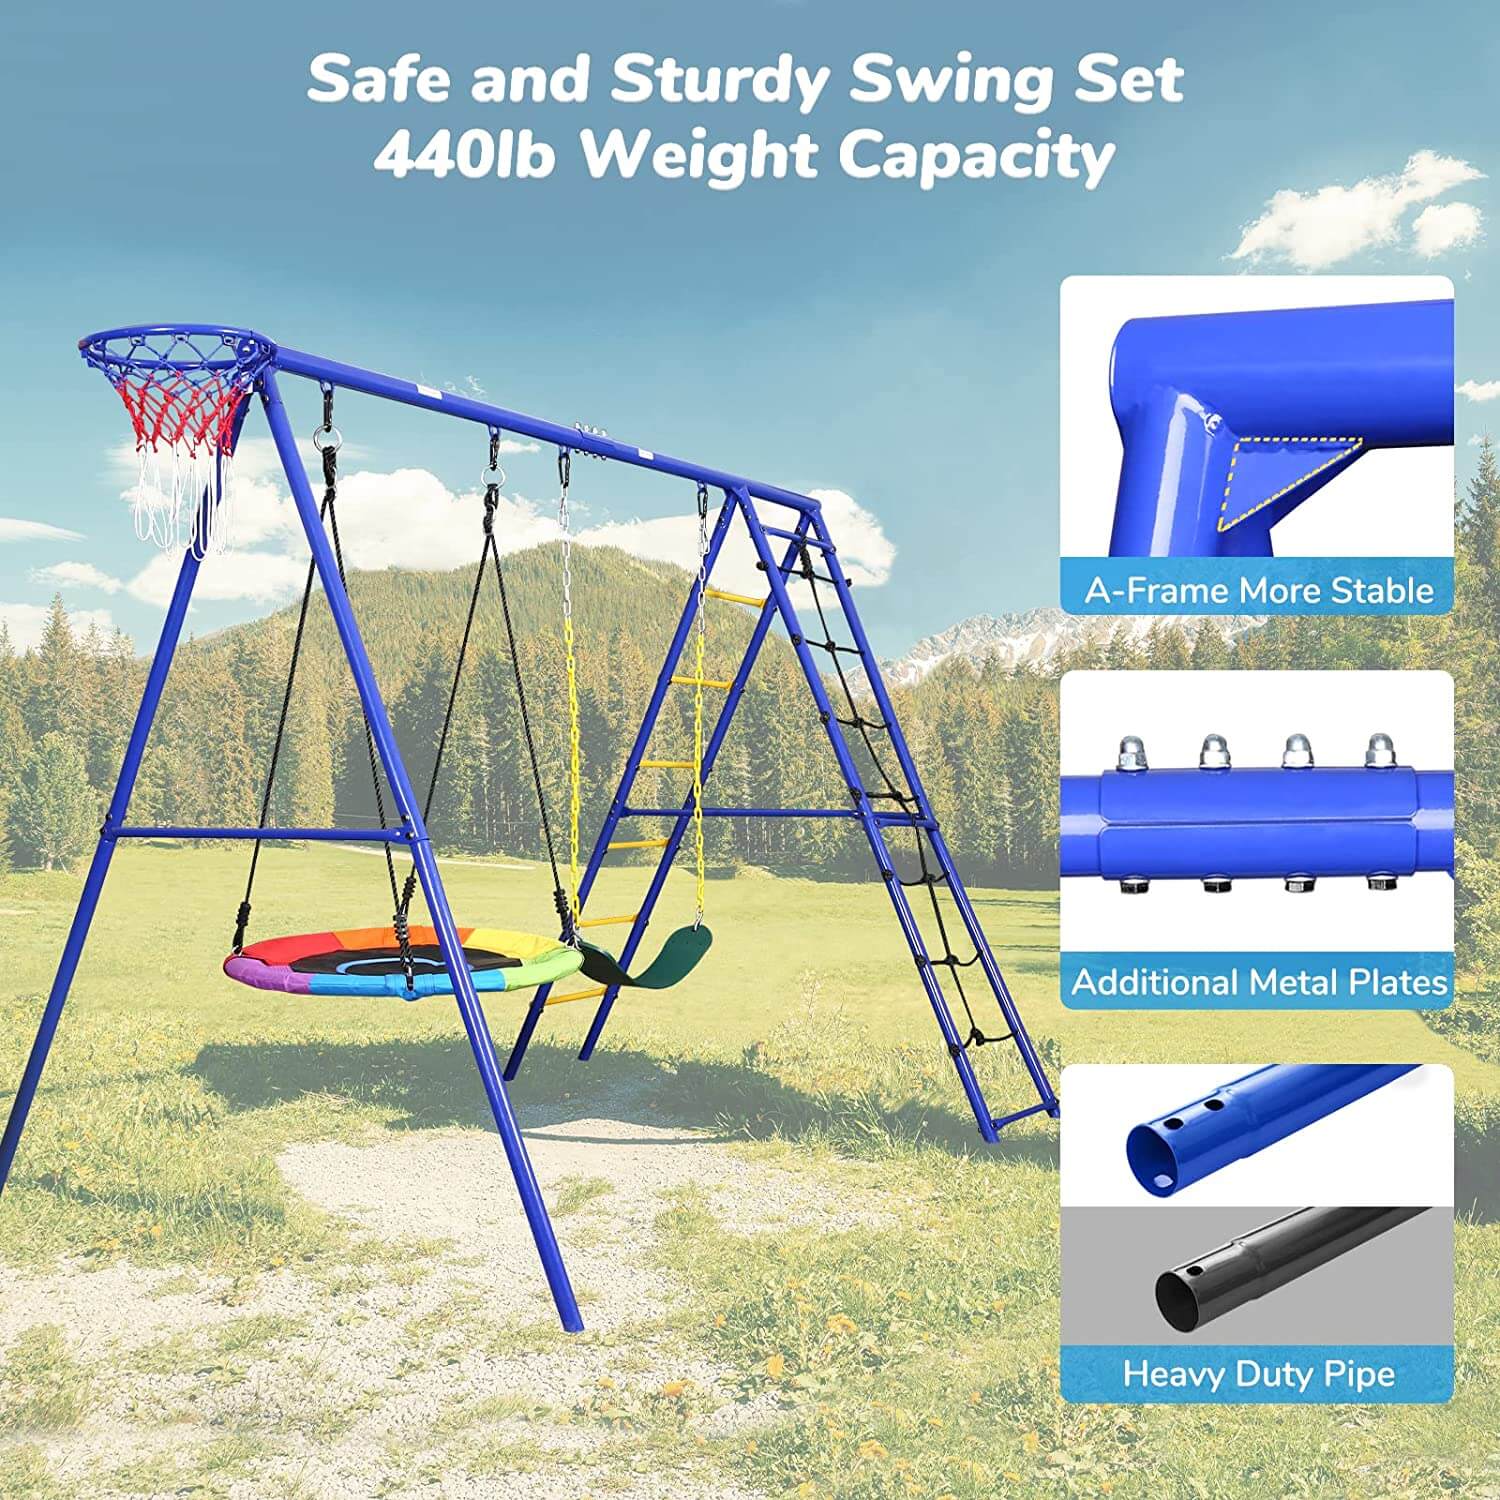 Safe and sturdy swing set 440lb weight capacity